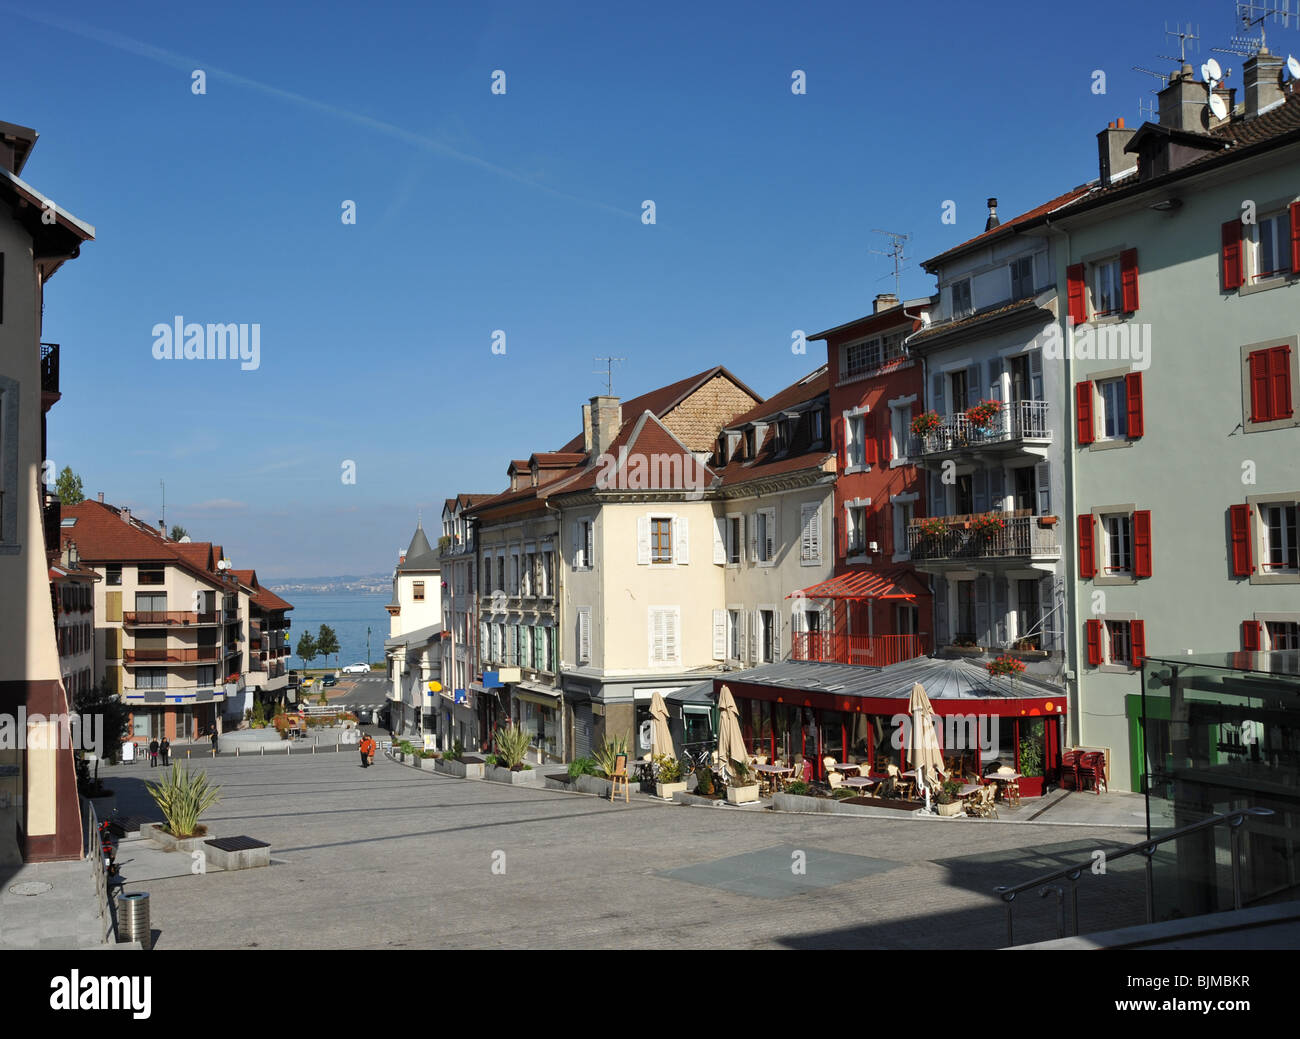 The lakeside town of Evian-les-Bains that is situated beside Lake Geneva in the Haute Savoie, Rhone Alpes region of France. Stock Photo